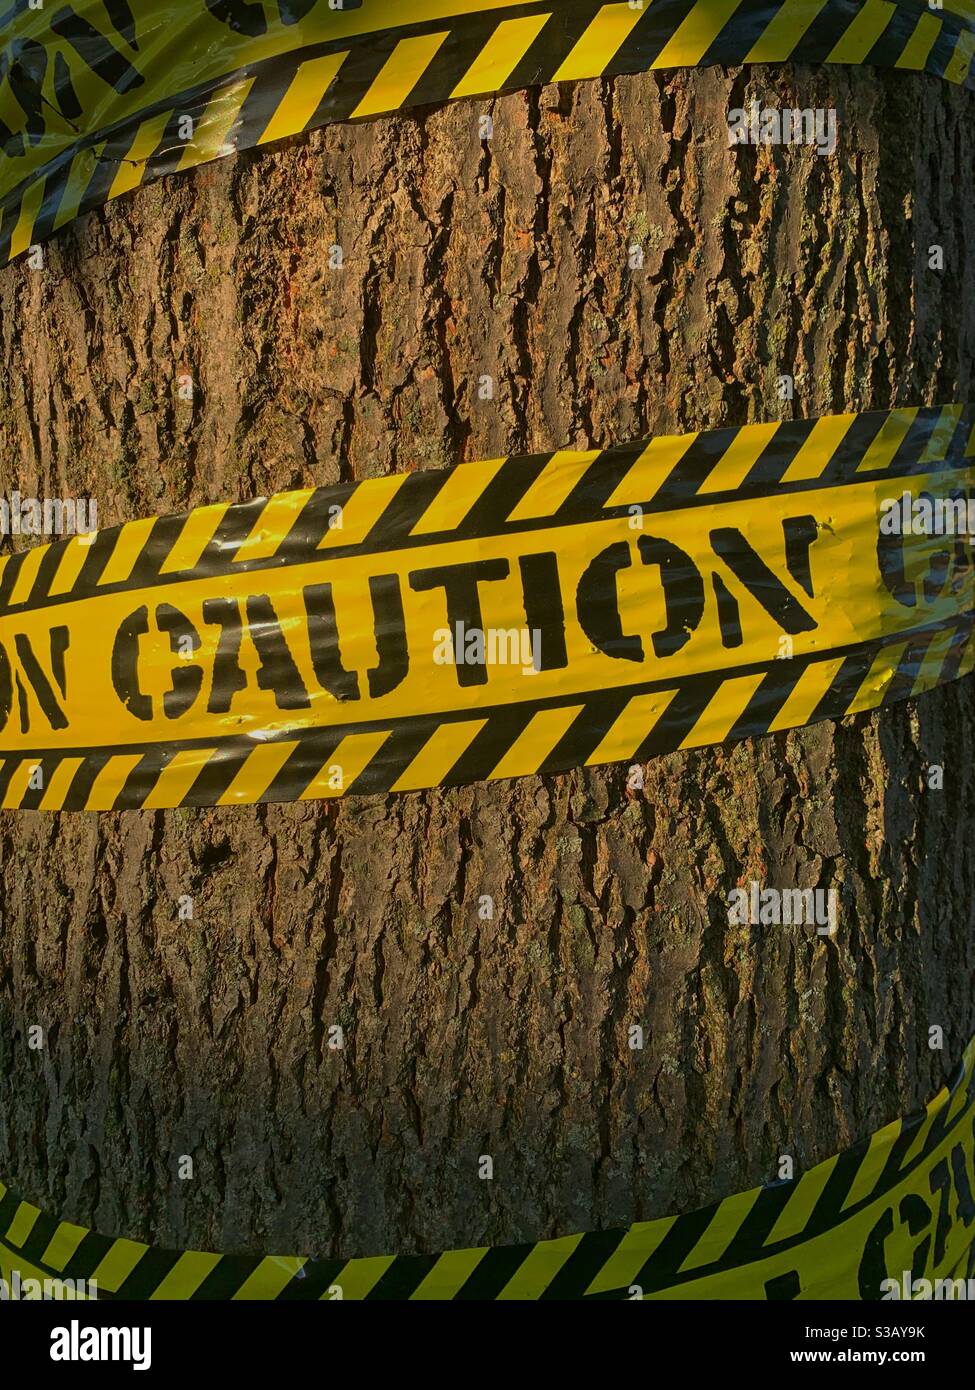 Halloween decoration yellow and black caution tape wrapped around a large tree trunk. Stock Photo